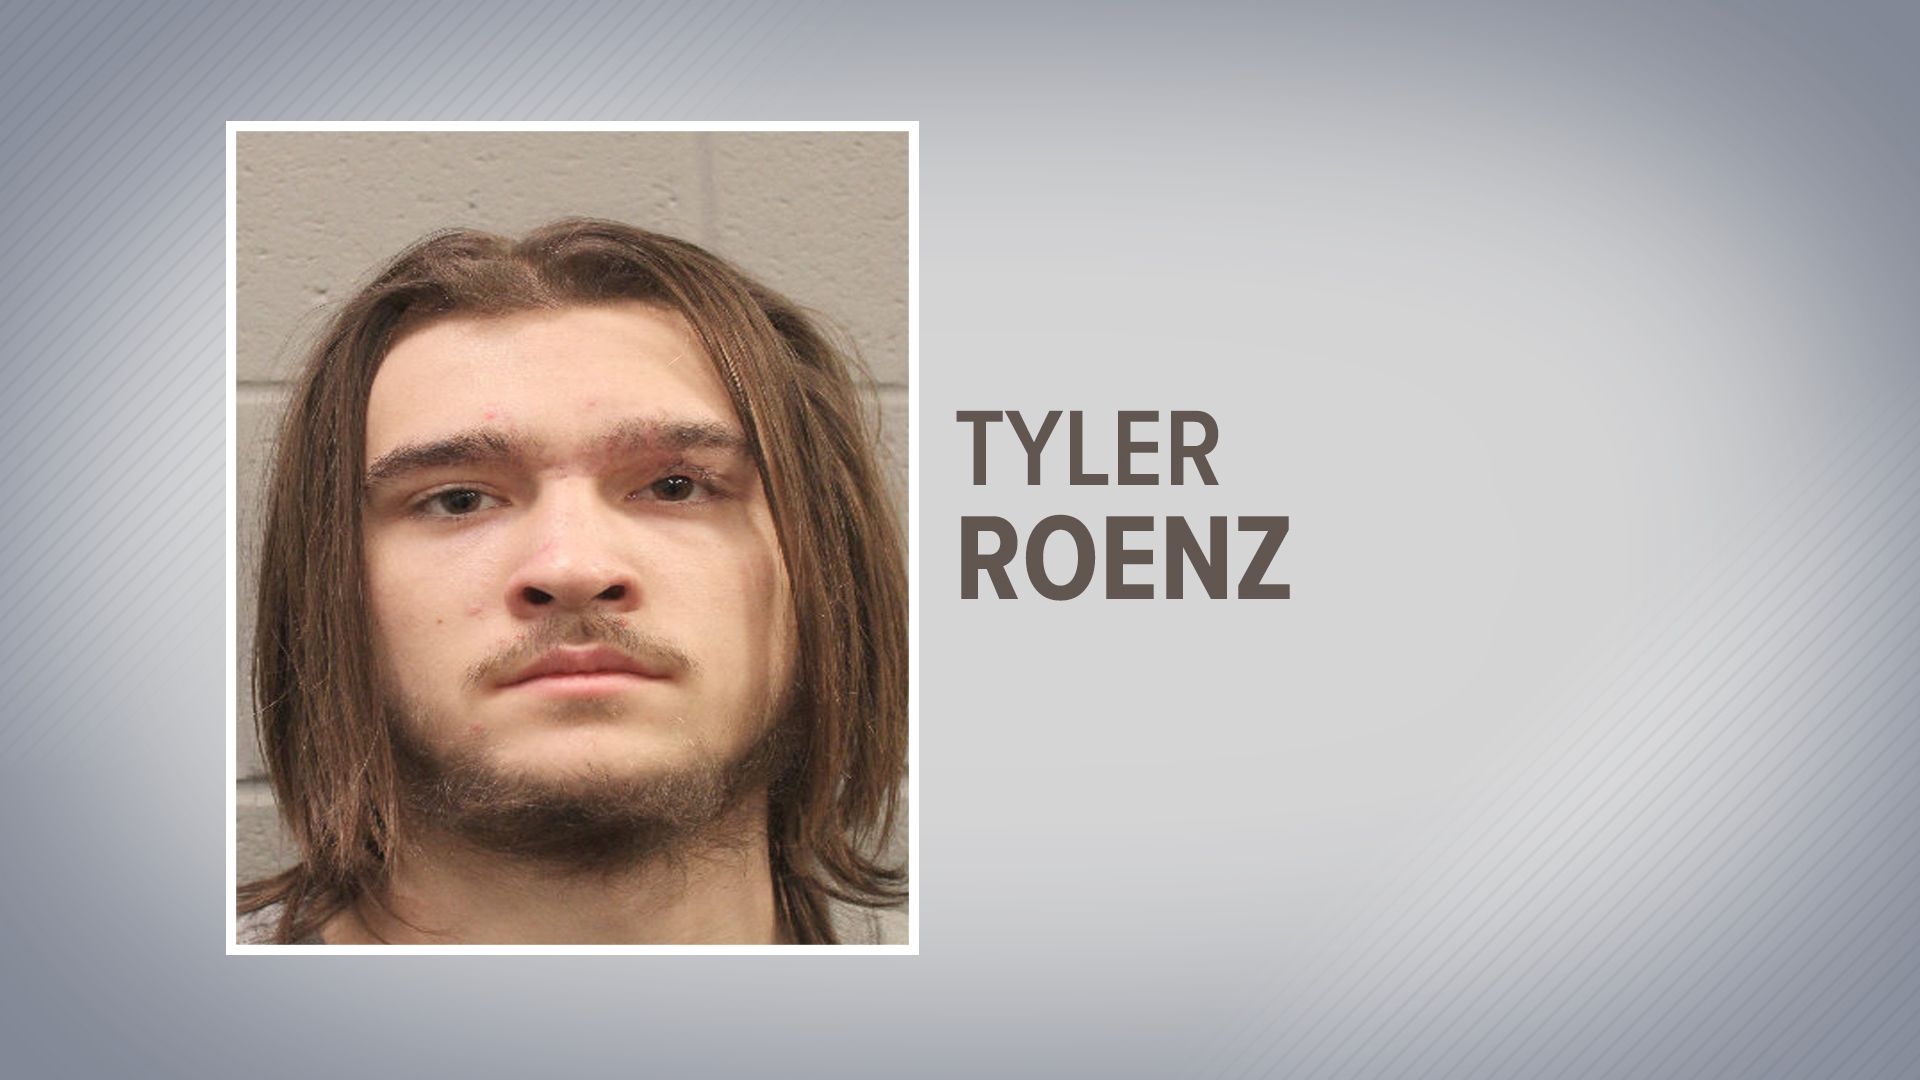 Tyler Roenz, 19, killed his mother, Michelle Roenz, 49, while the two were at home on the morning of Oct. 13, 2022.